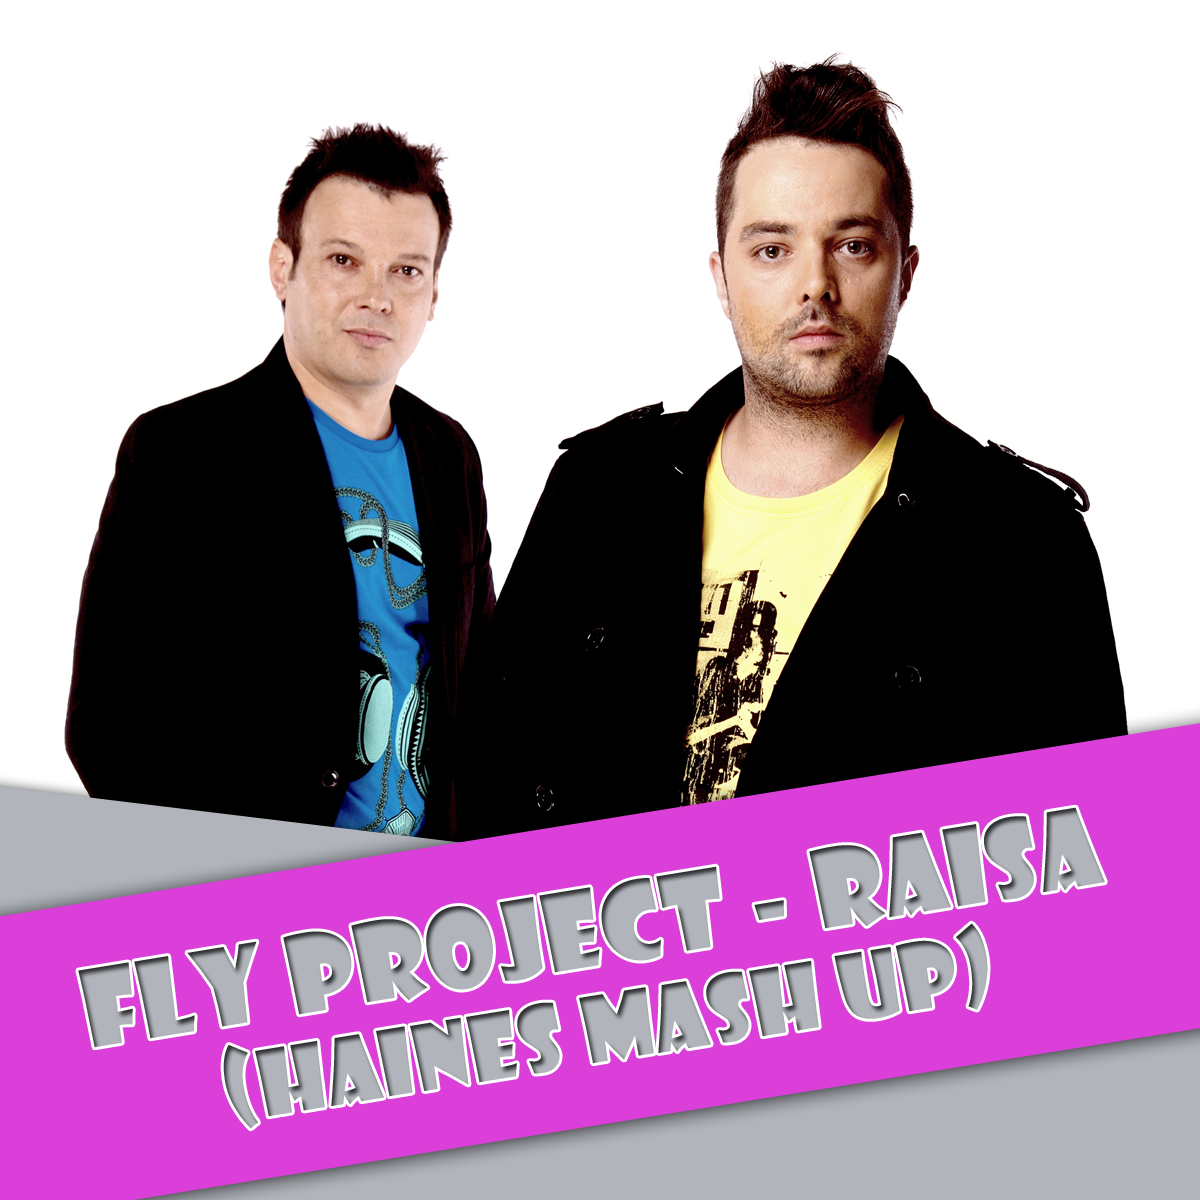 Fly Project - Raisa (Haines Mash Up) [2012]